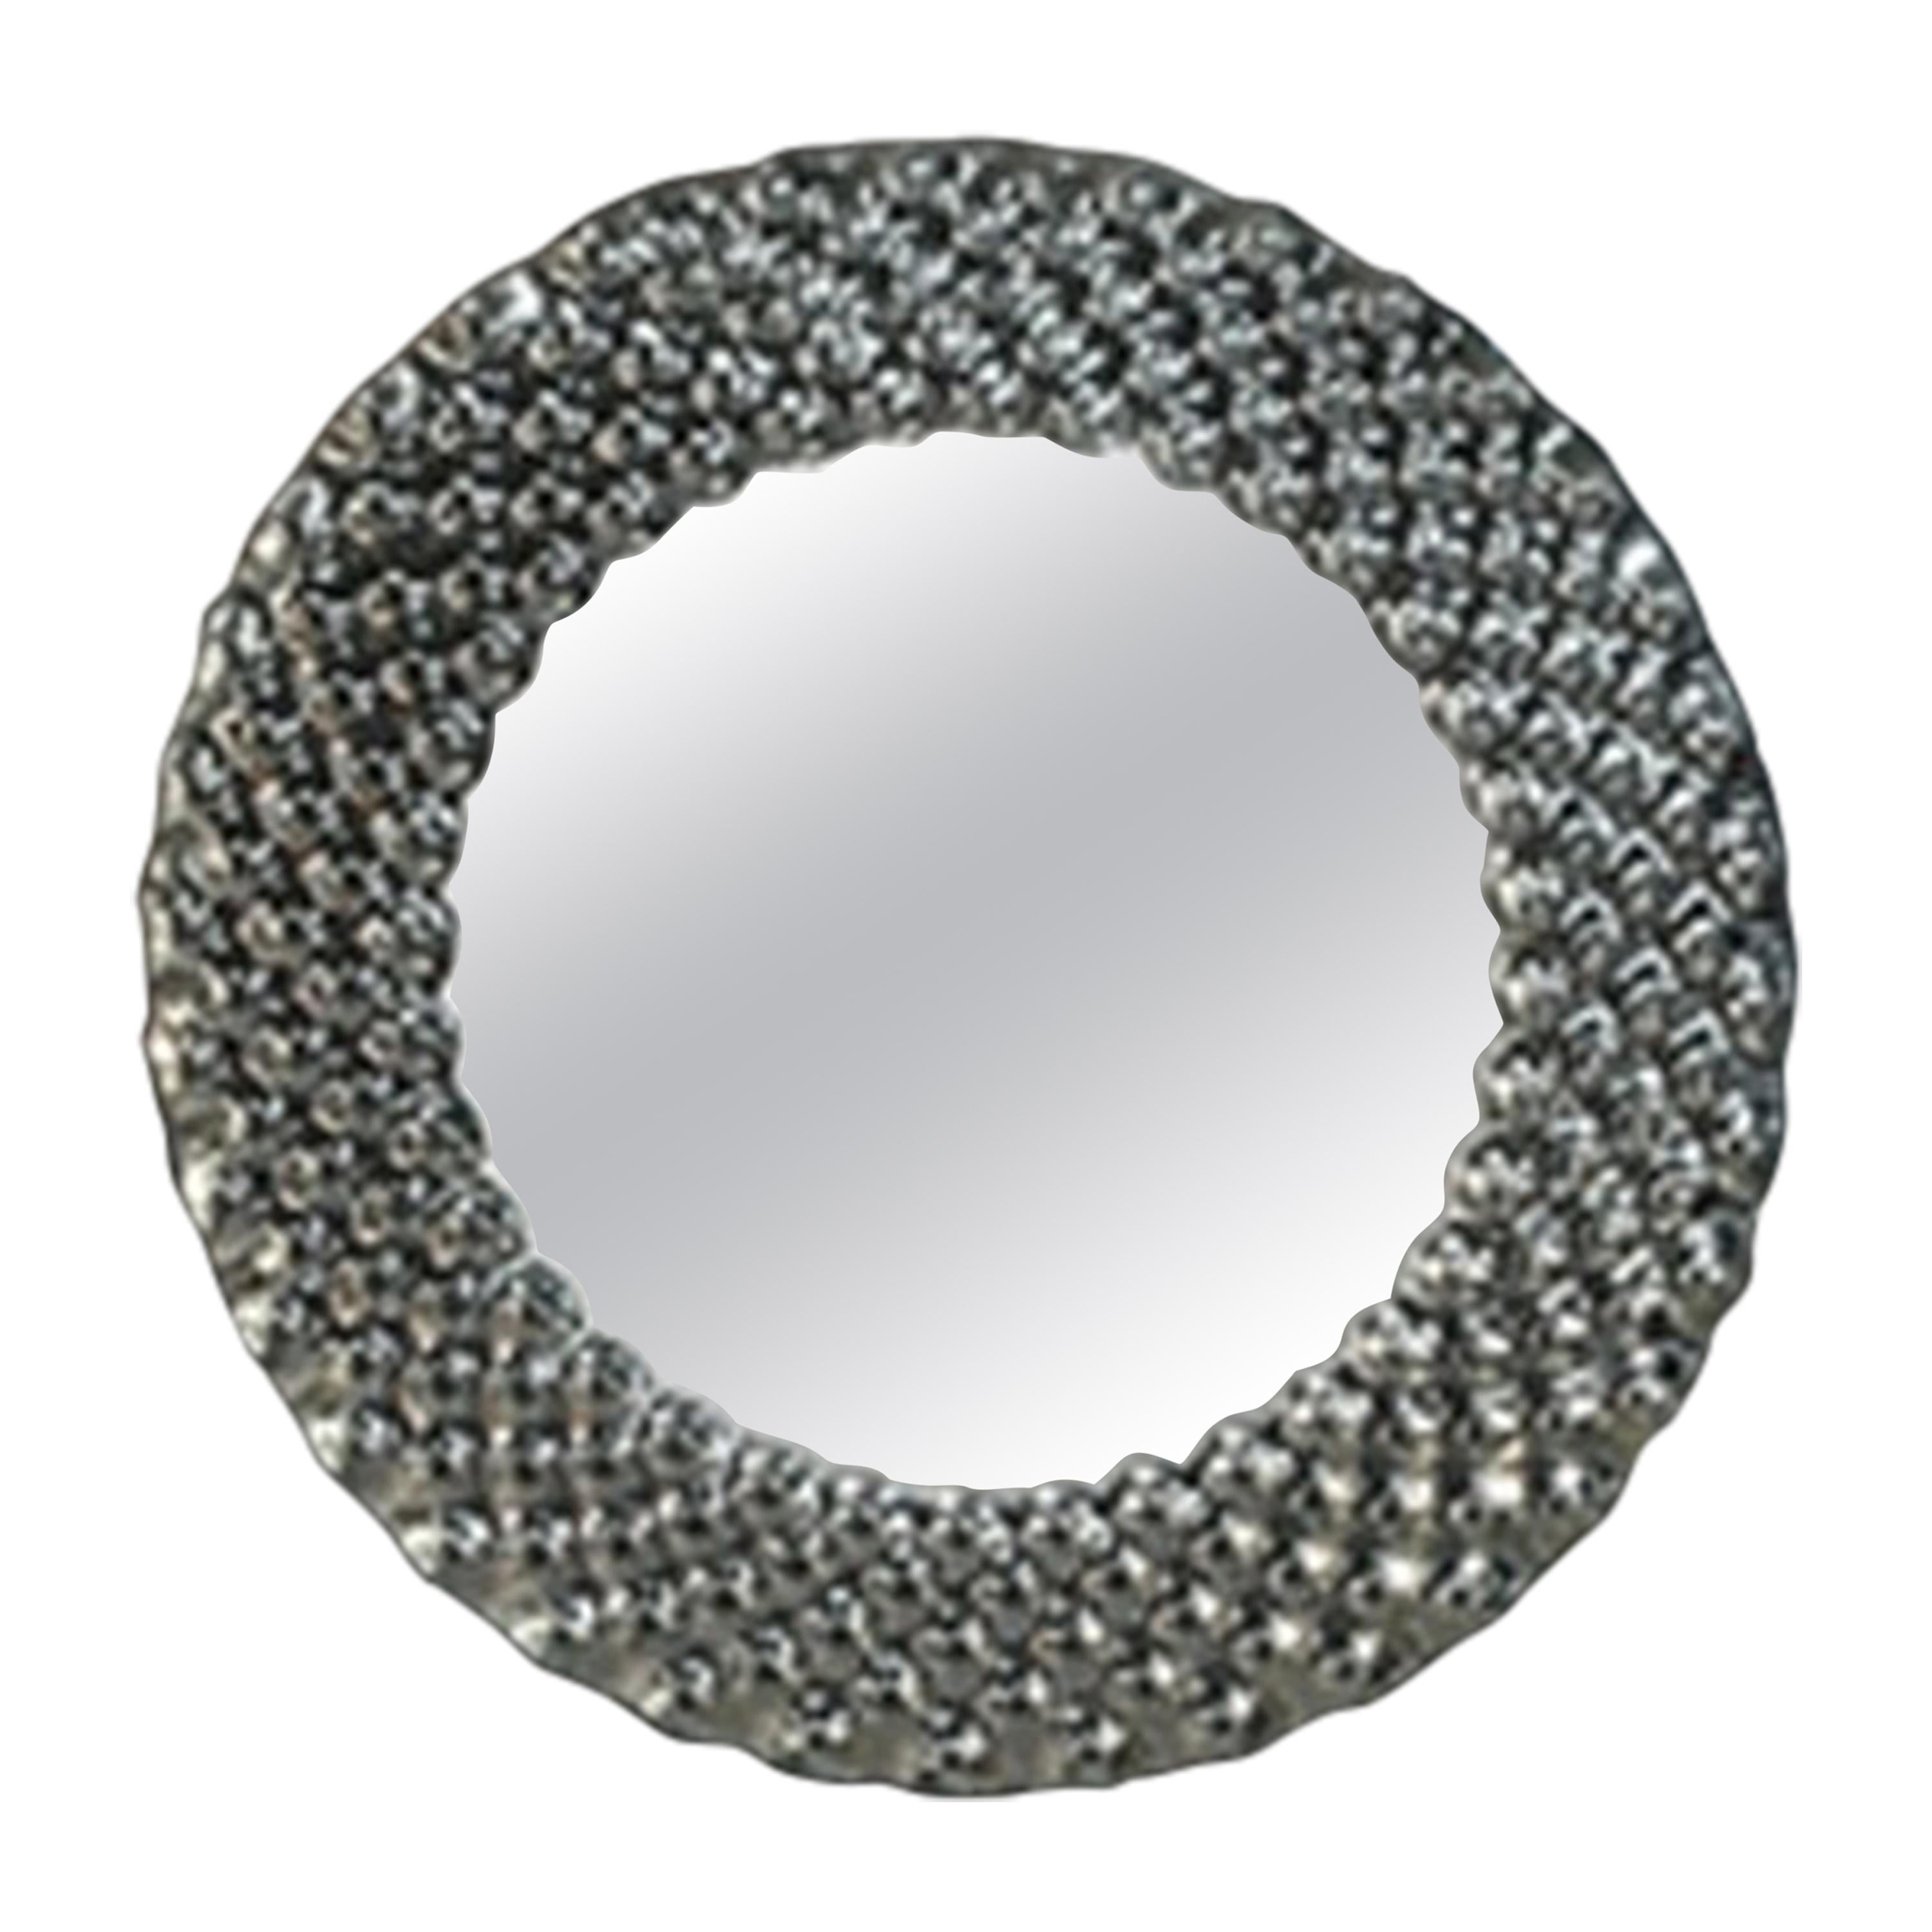 Fiam Pop PP/96 Round Wall Mirror in Fused Glass, by Marcel Wanders